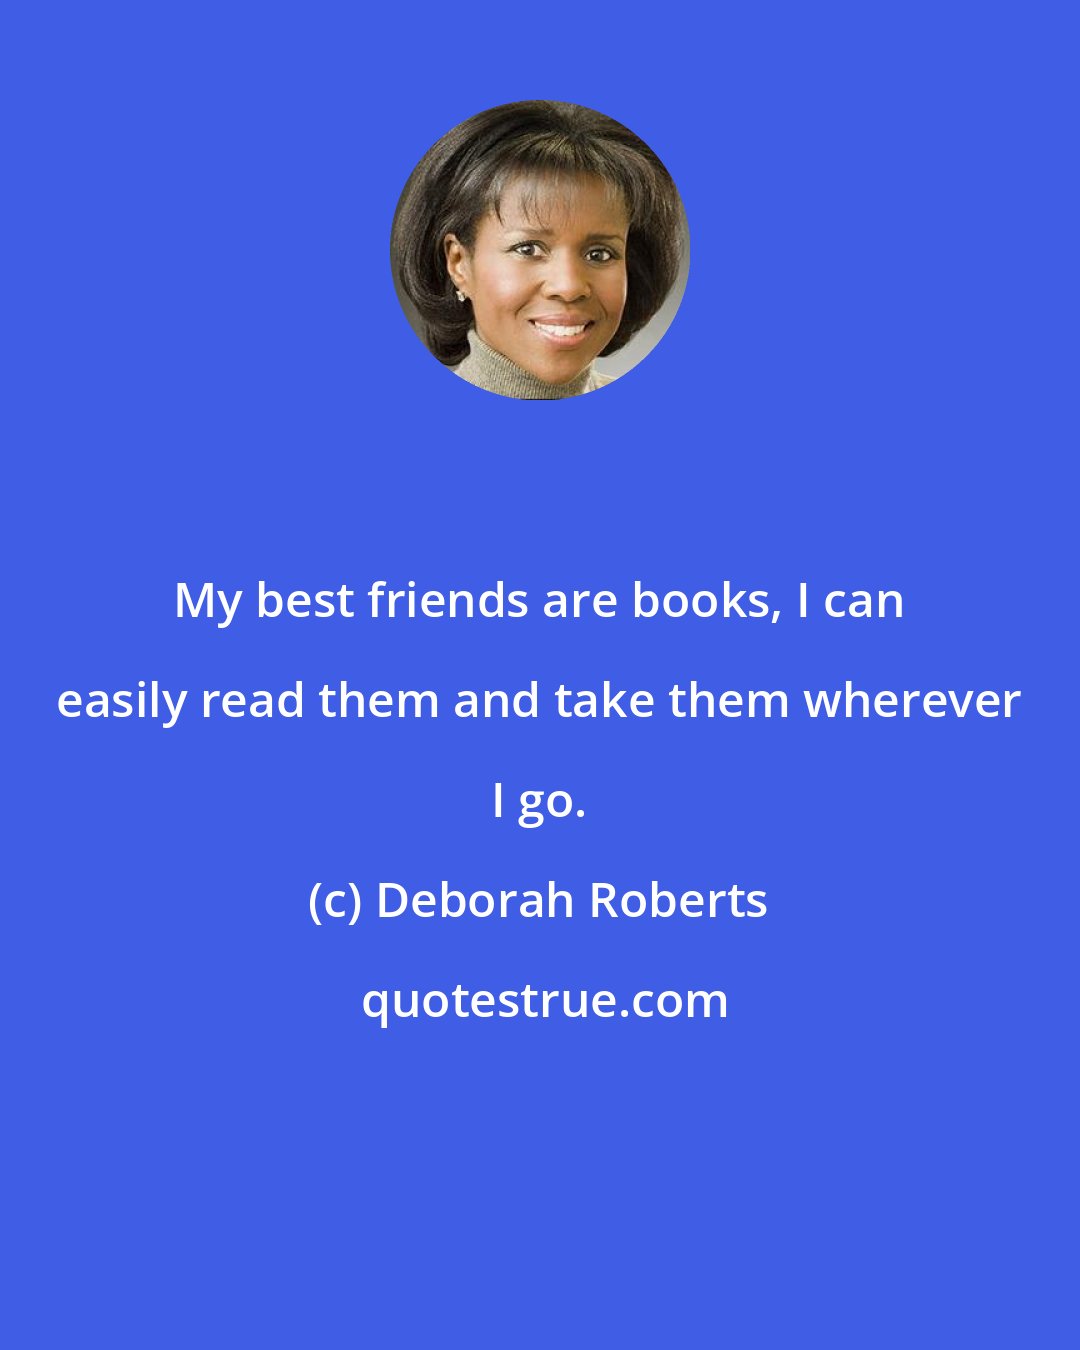 Deborah Roberts: My best friends are books, I can easily read them and take them wherever I go.